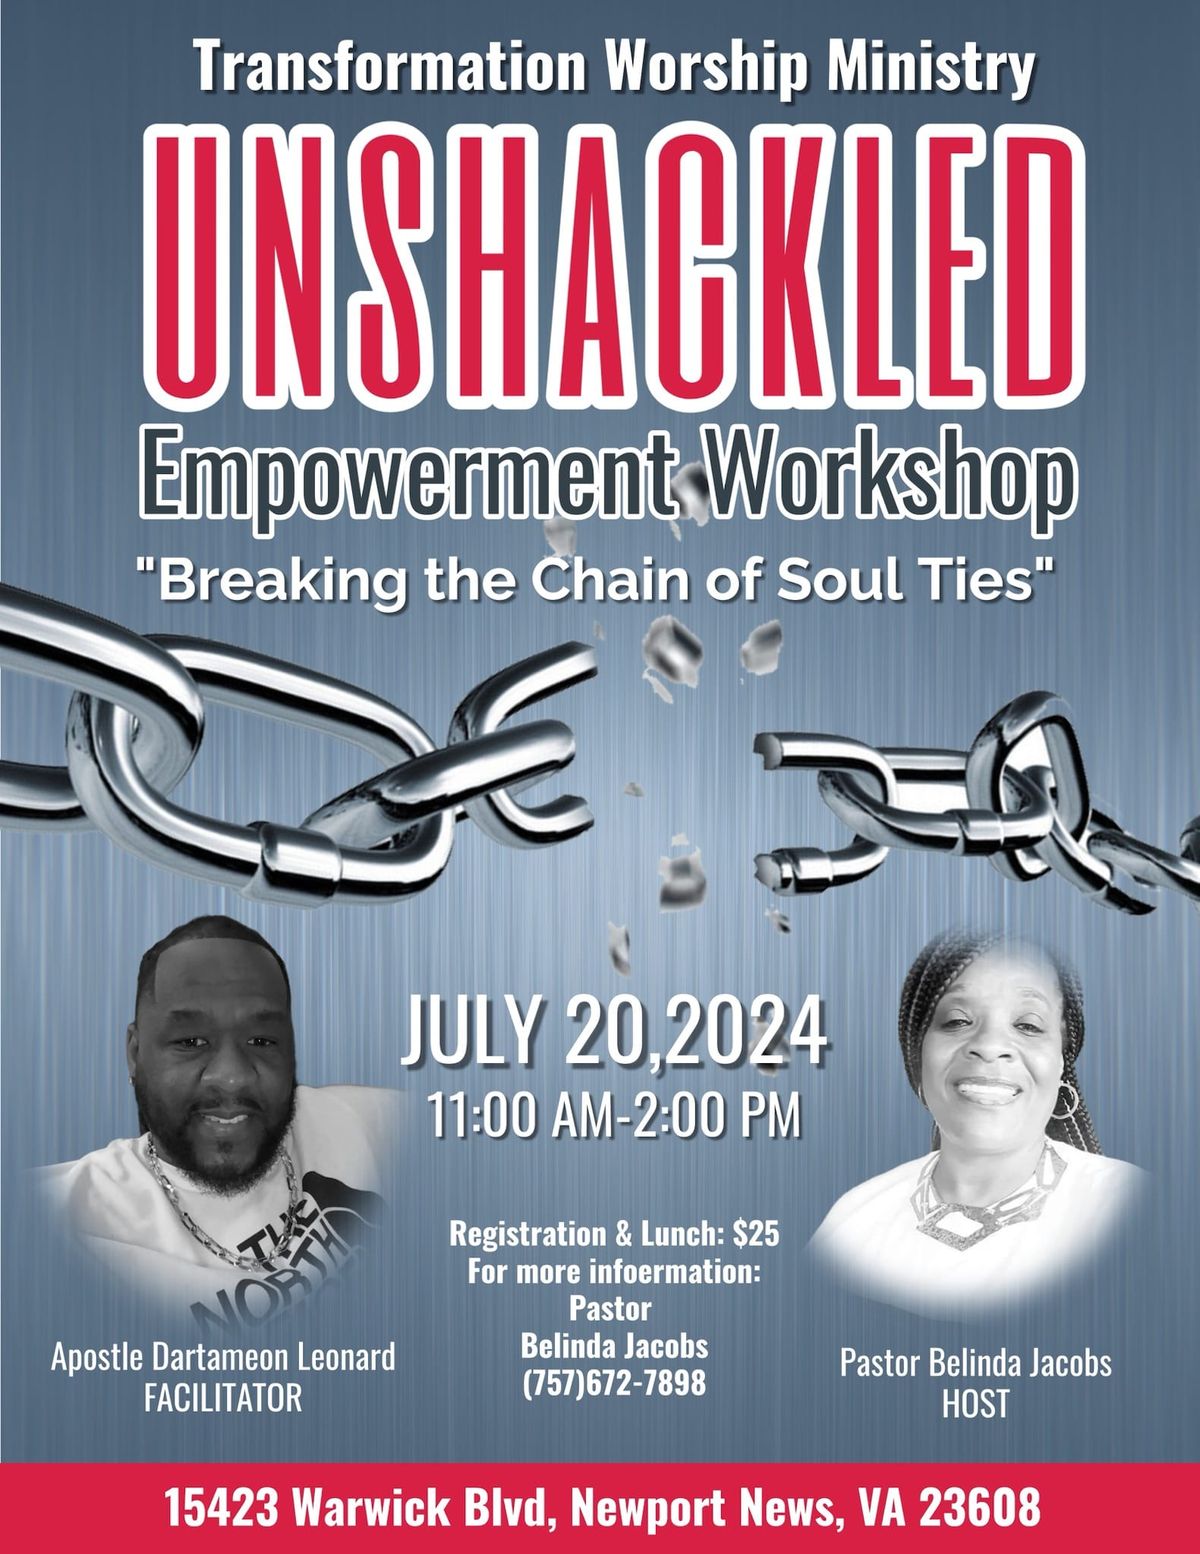 UNSHACKLED EMPOWERMENT WORKSHOP BREAKING THE CHAINS OF SOUL TIES